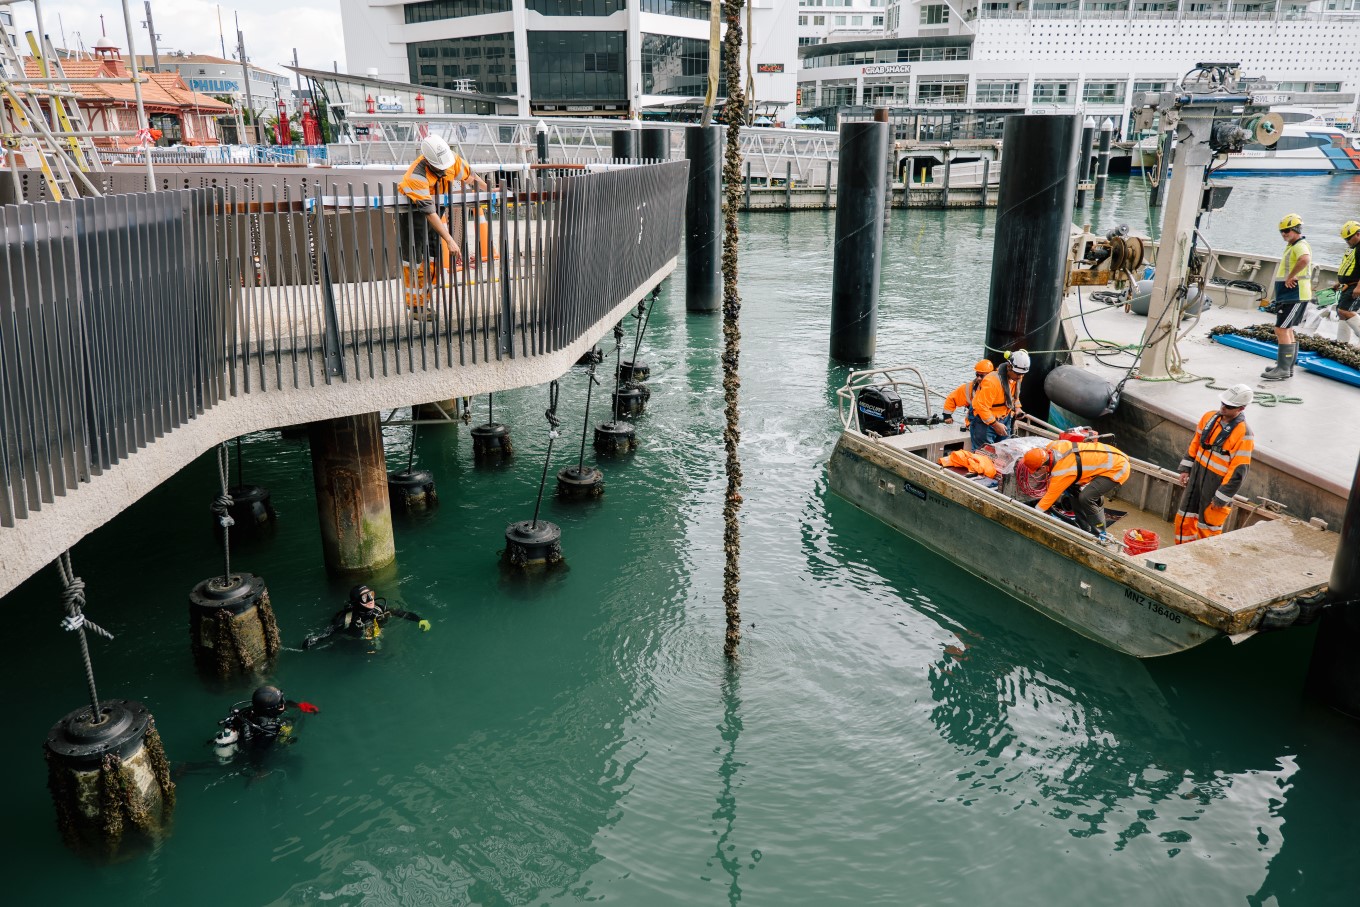 Workers install mussel lines at Te Wānanga, each mature mussel will filter 150-200 litres of seawater.